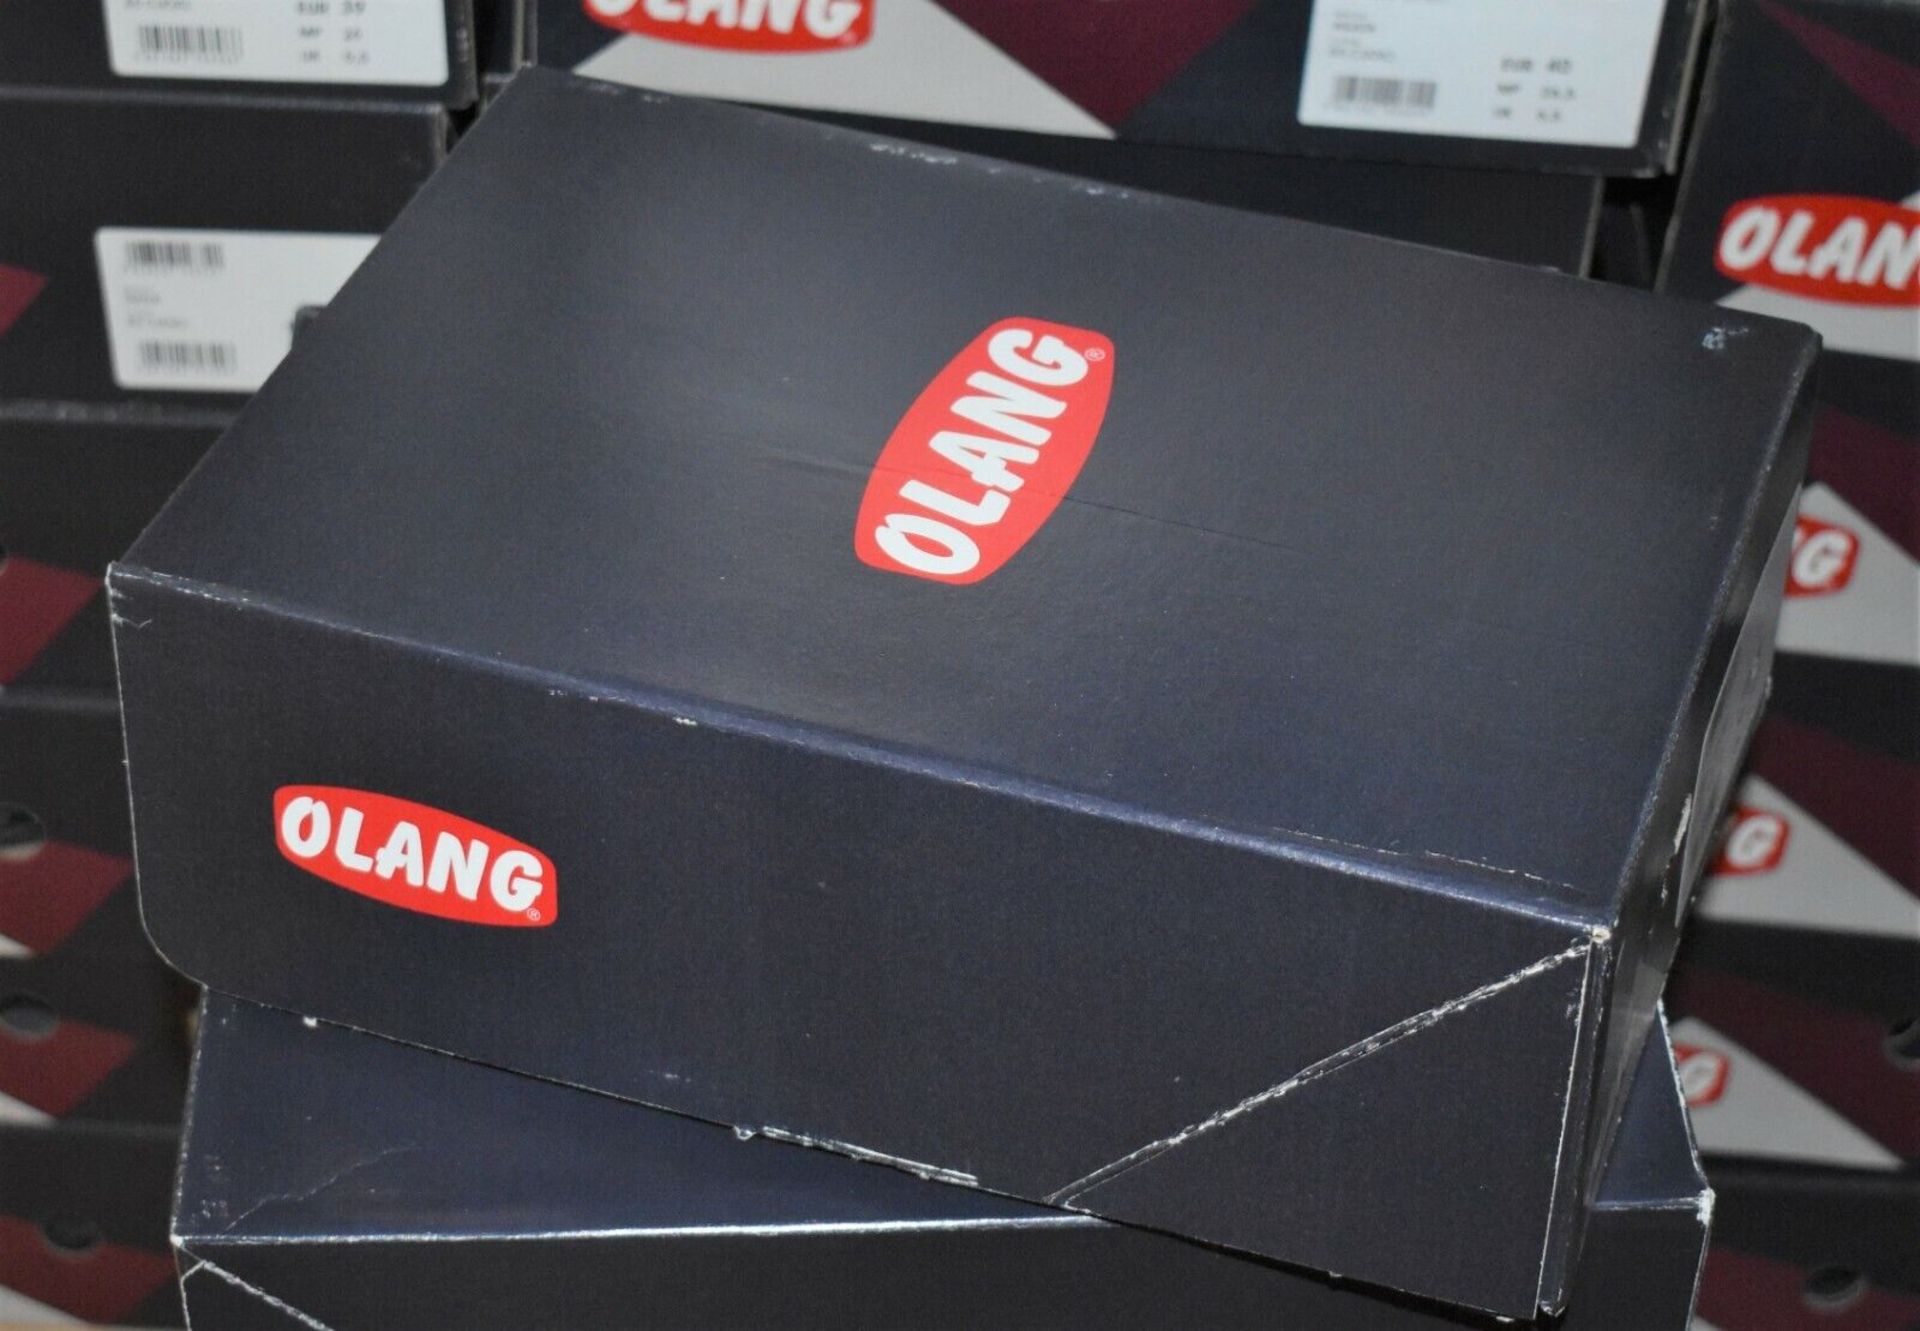 1 x Pair of Designer Olang Women's Winter Boots - Merano.Win.BTX 85 Cuoio - Euro Size 40 - New Boxed - Image 2 of 2